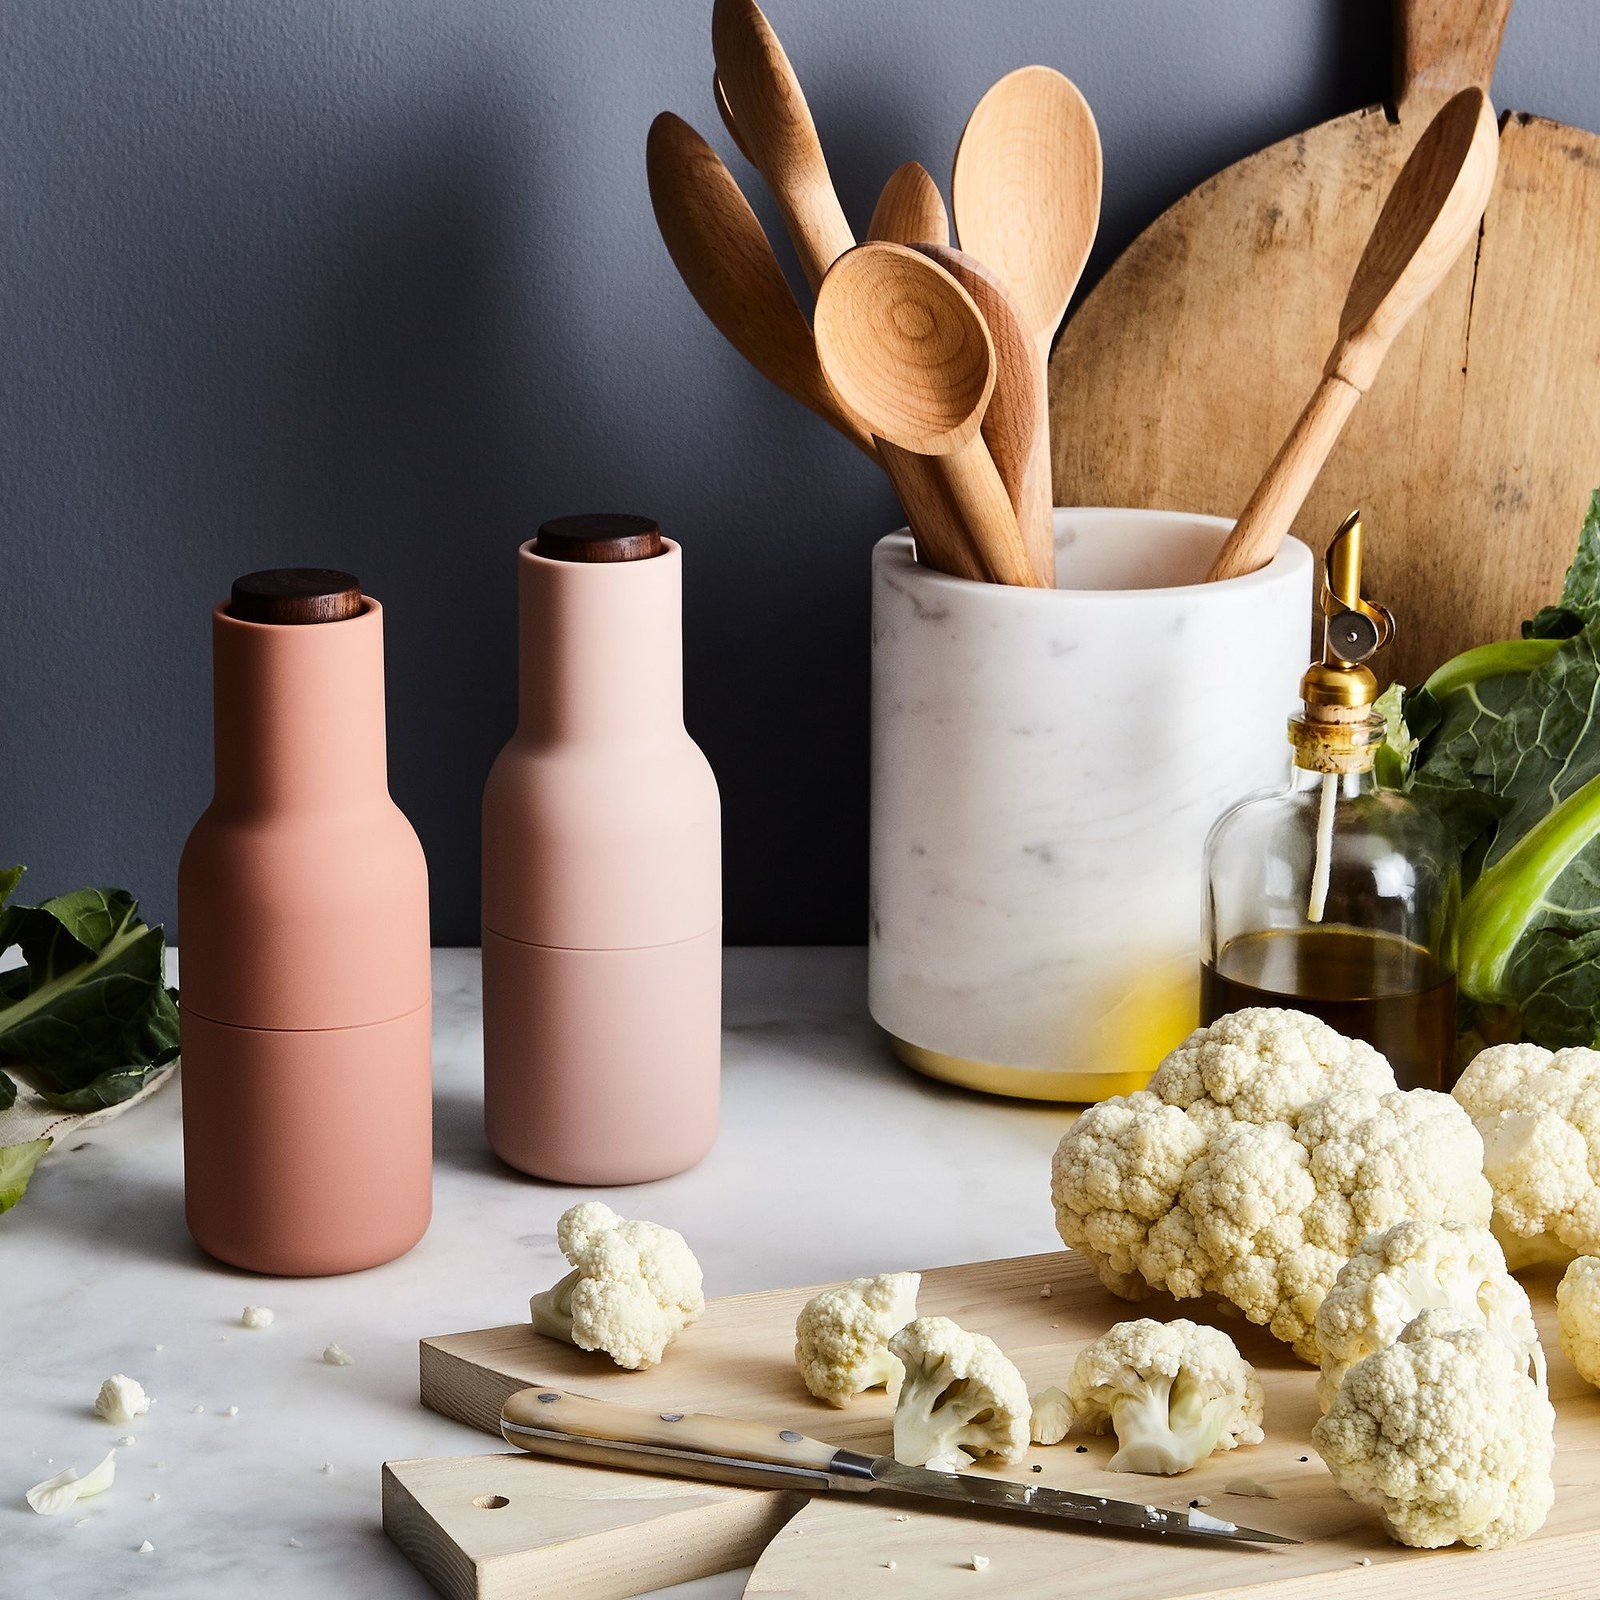 Pastel Kitchen Products That Will Be the Envy of All Your Friends